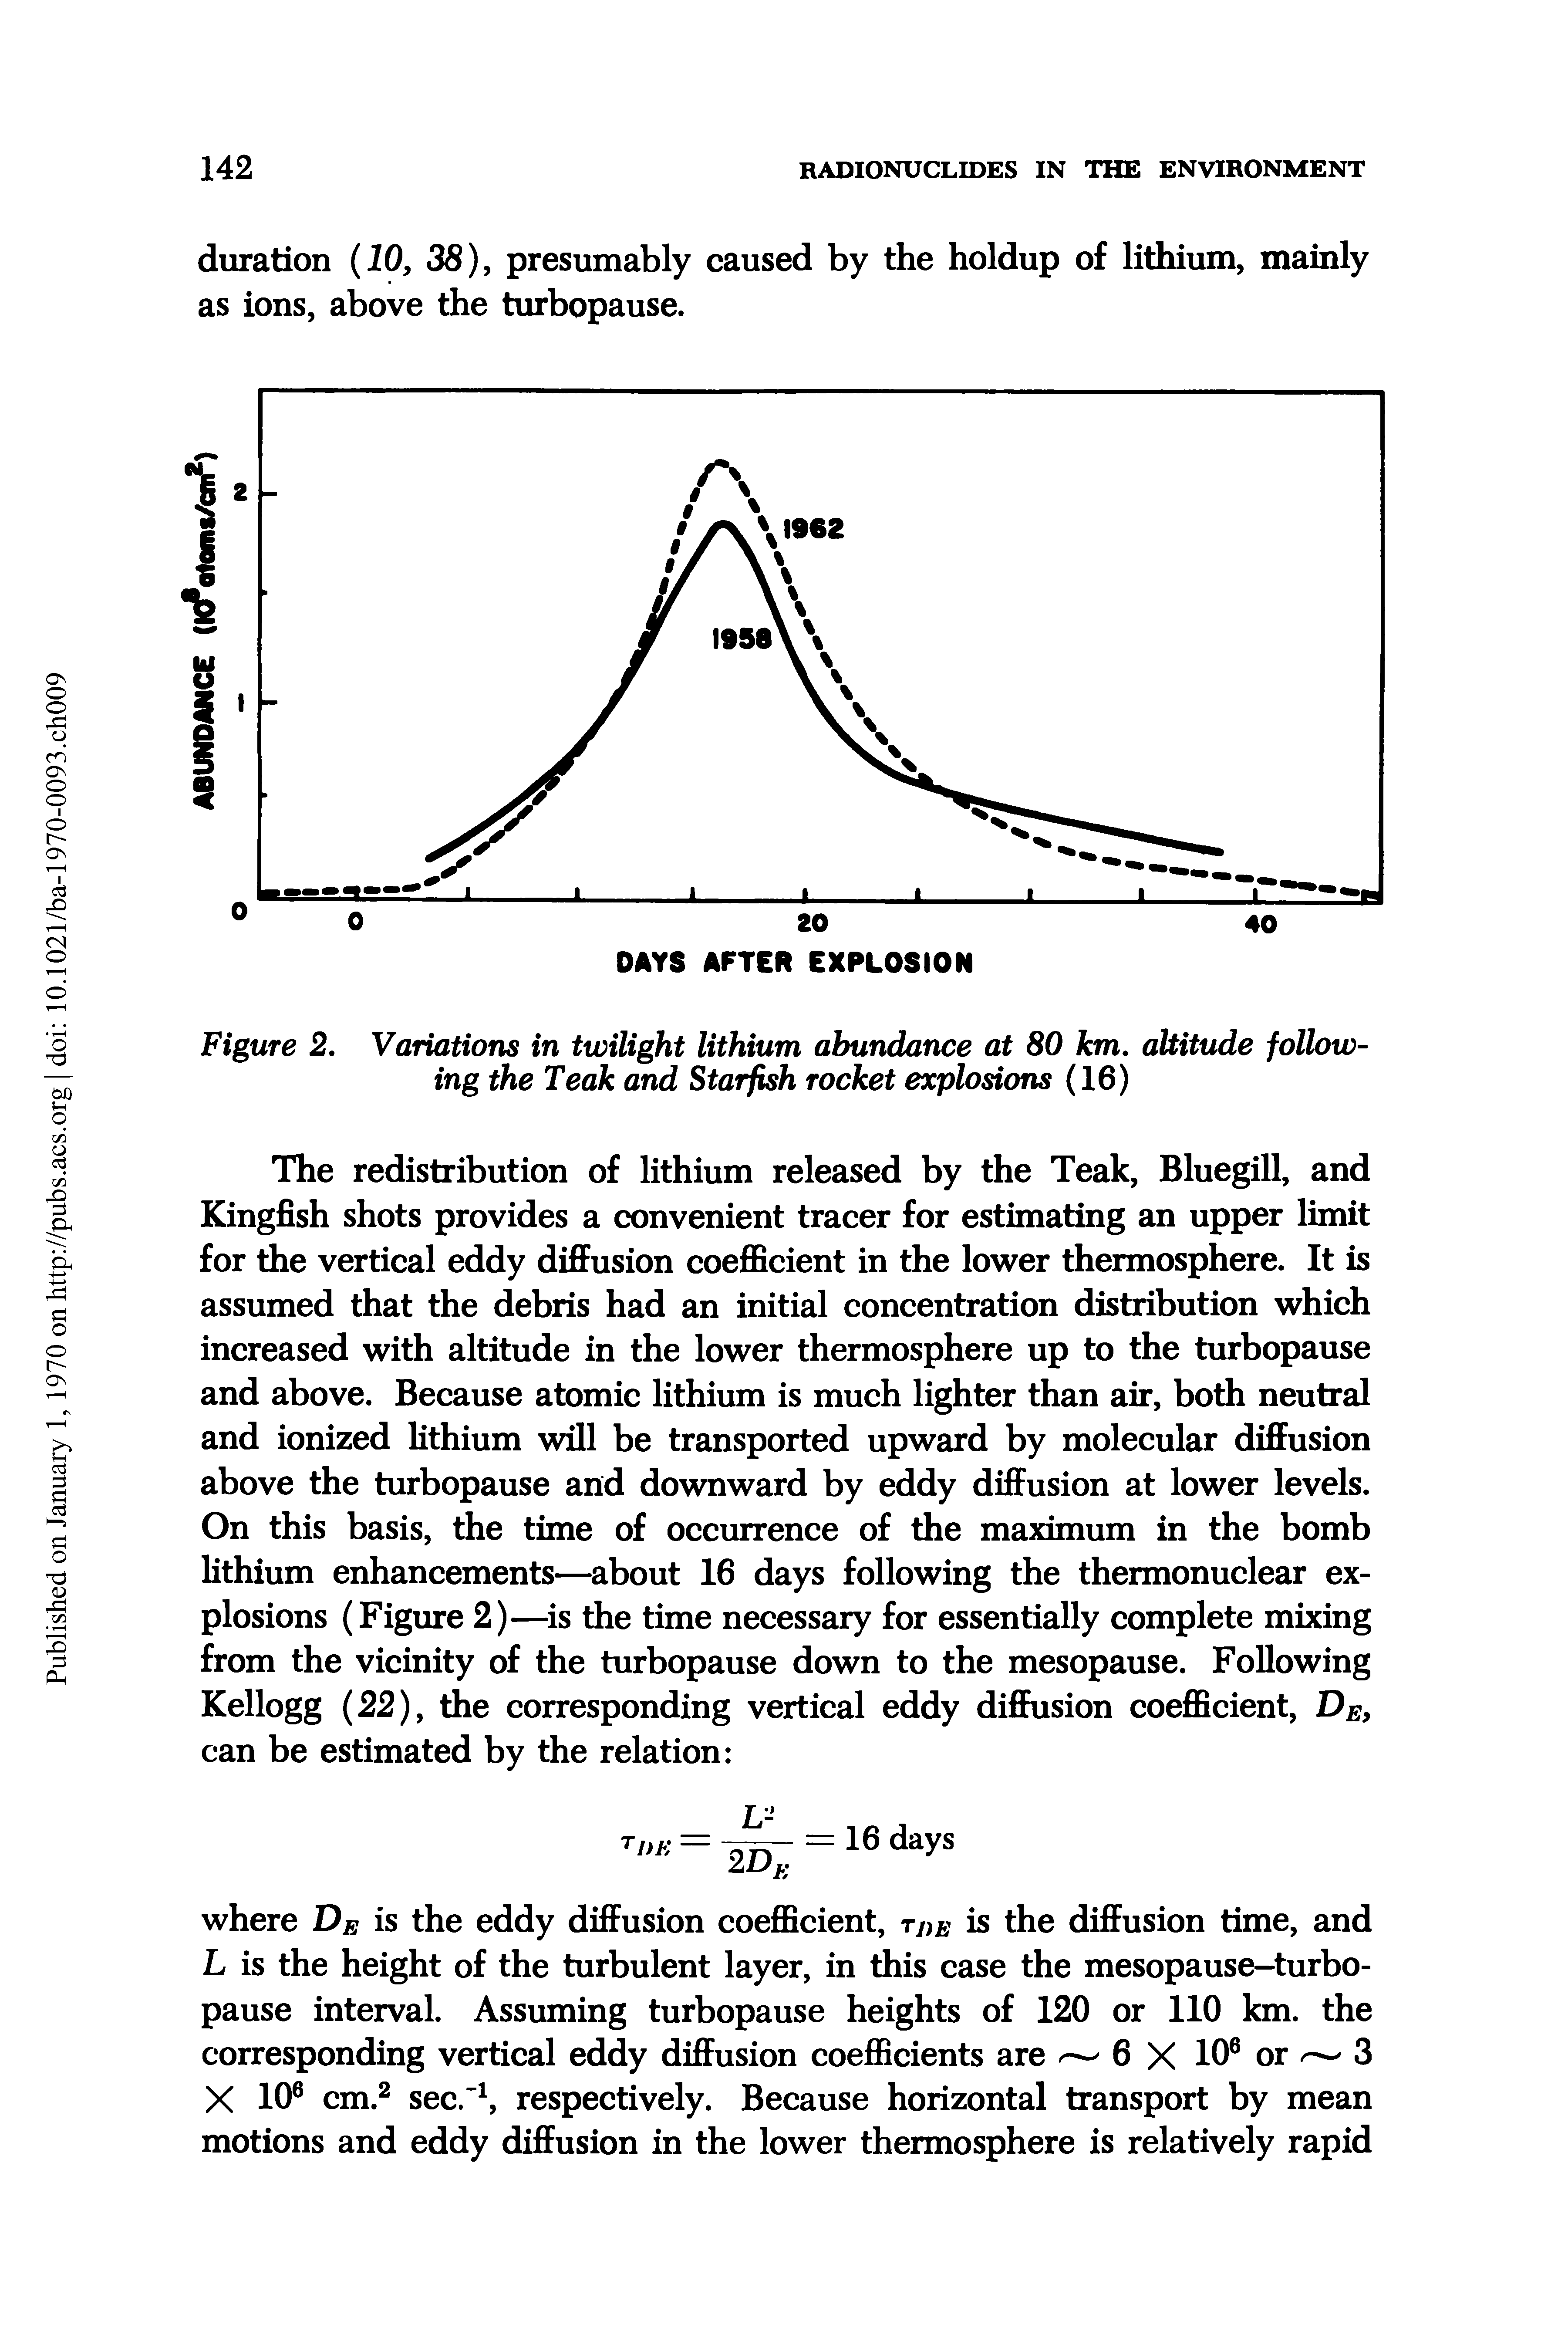 Figure 2. Variations in twilight lithium abundance at 80 km. altitude following the Teak and Starfish rocket explosions (16)...